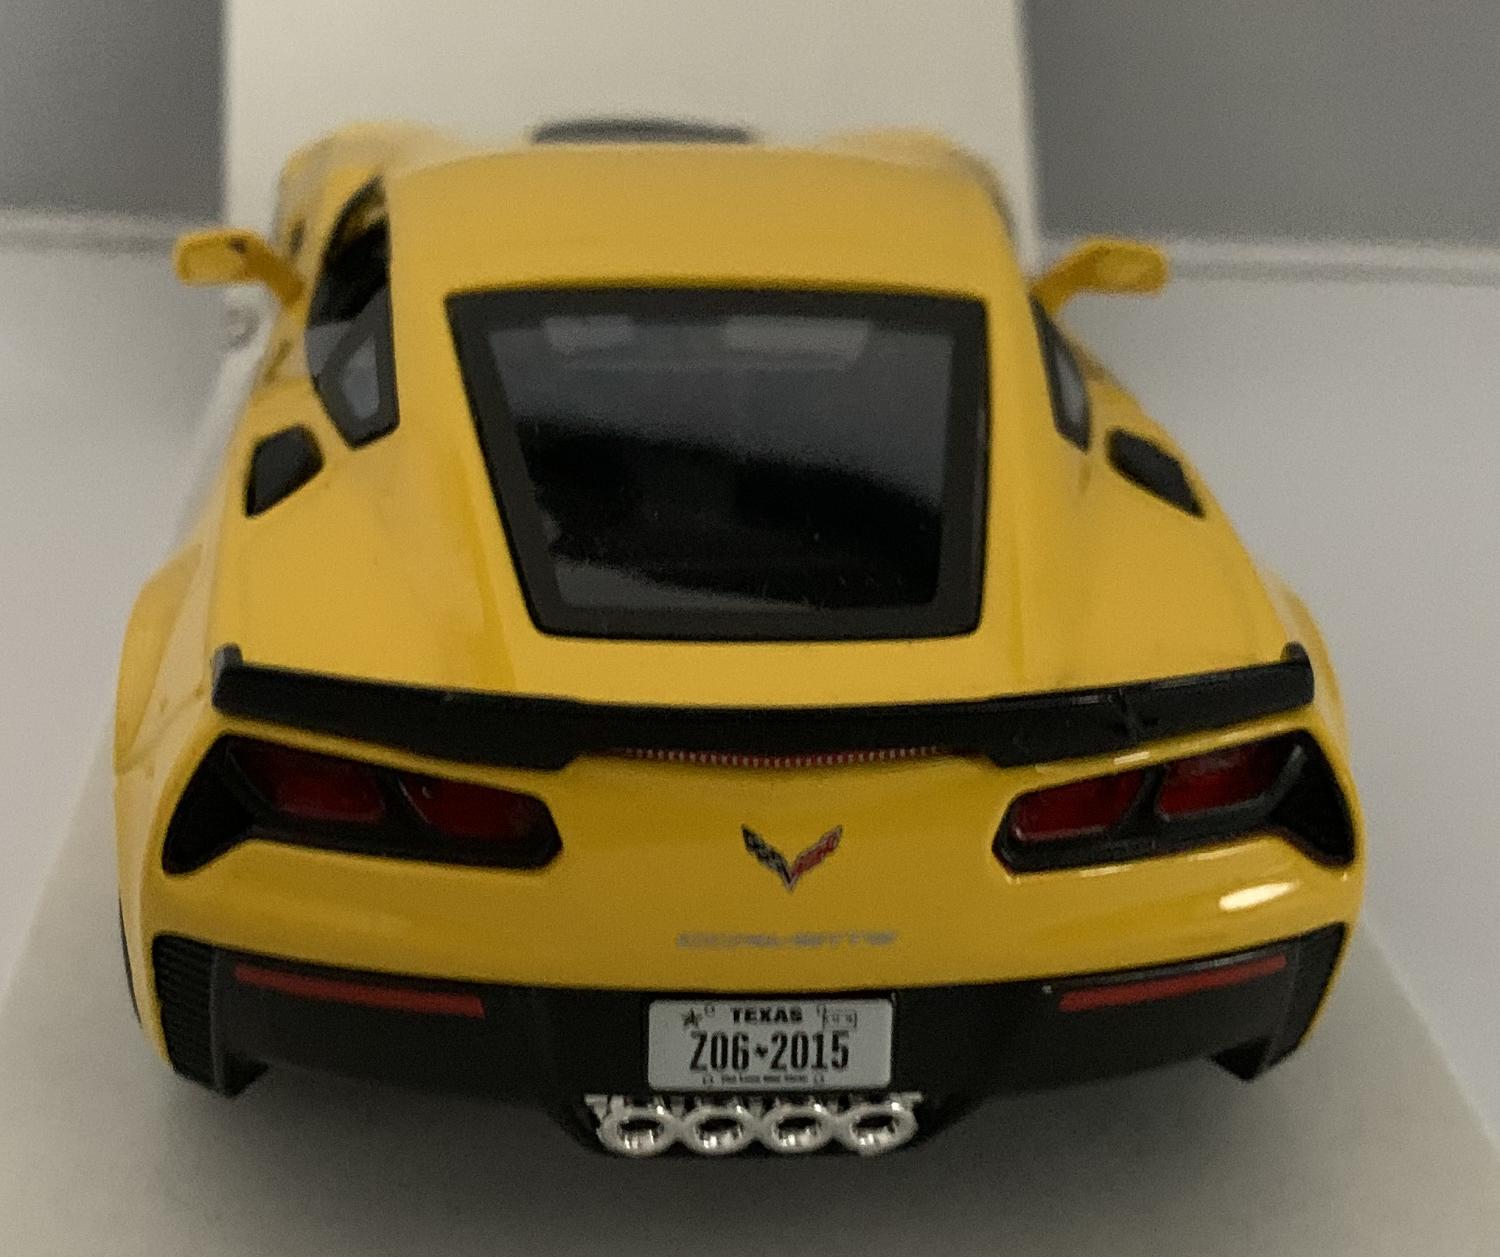 A good reproduction of the Chevrolet Corvette Z06 with detail throughout, all authentically recreated. Model is presented in a window display box, the car is approx. 19 cm long and the presentation box is 23 cm long